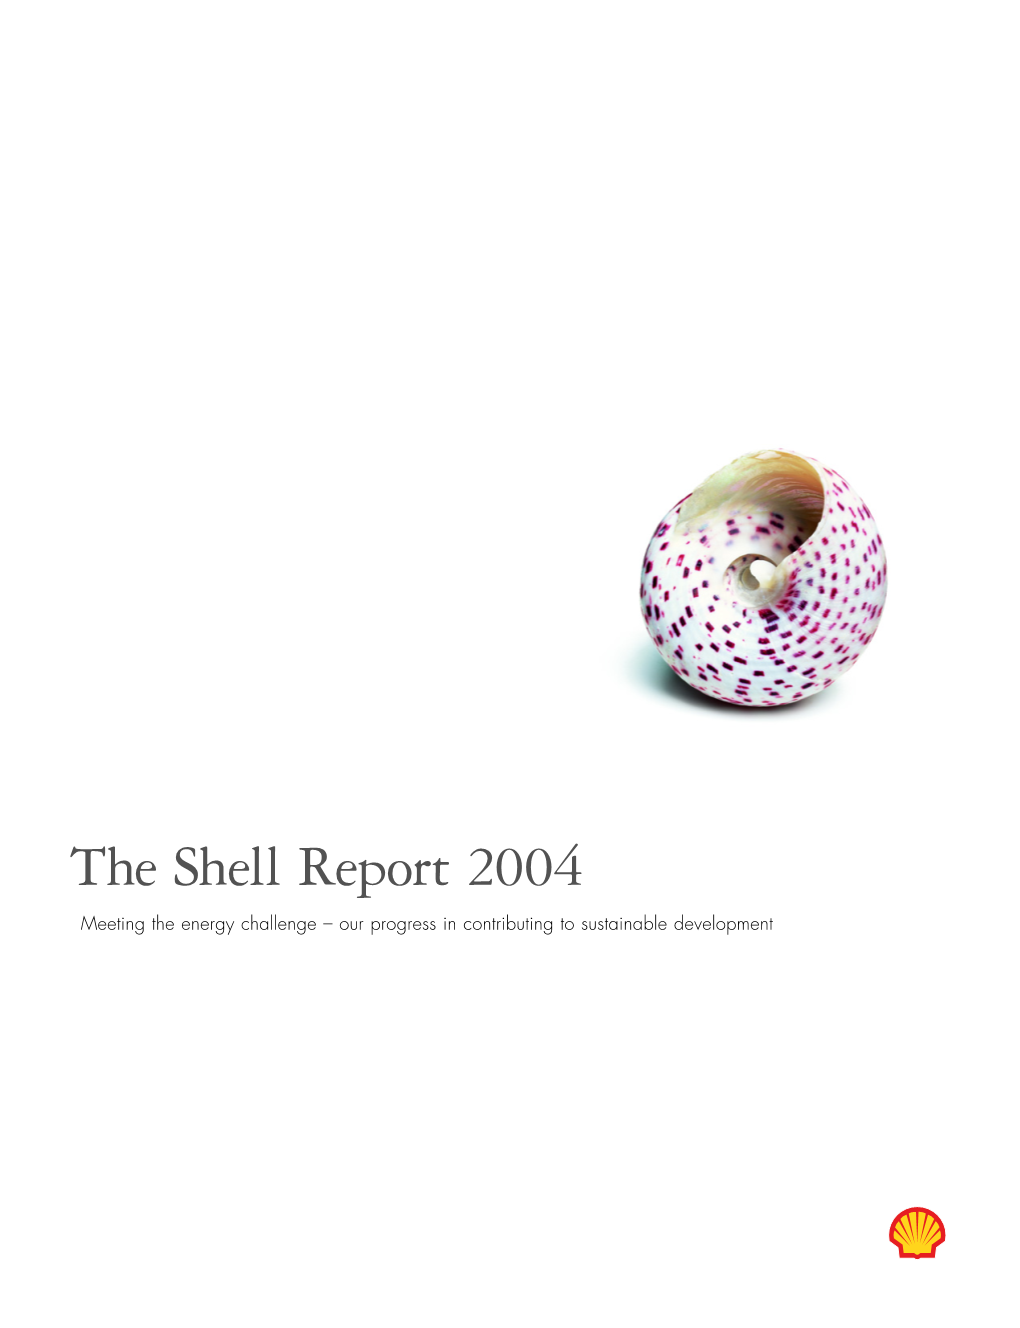 The Shell Report 2004 Meeting the Energy Challenge – Our Progress in Contributing to Sustainable Development Guide to Contents